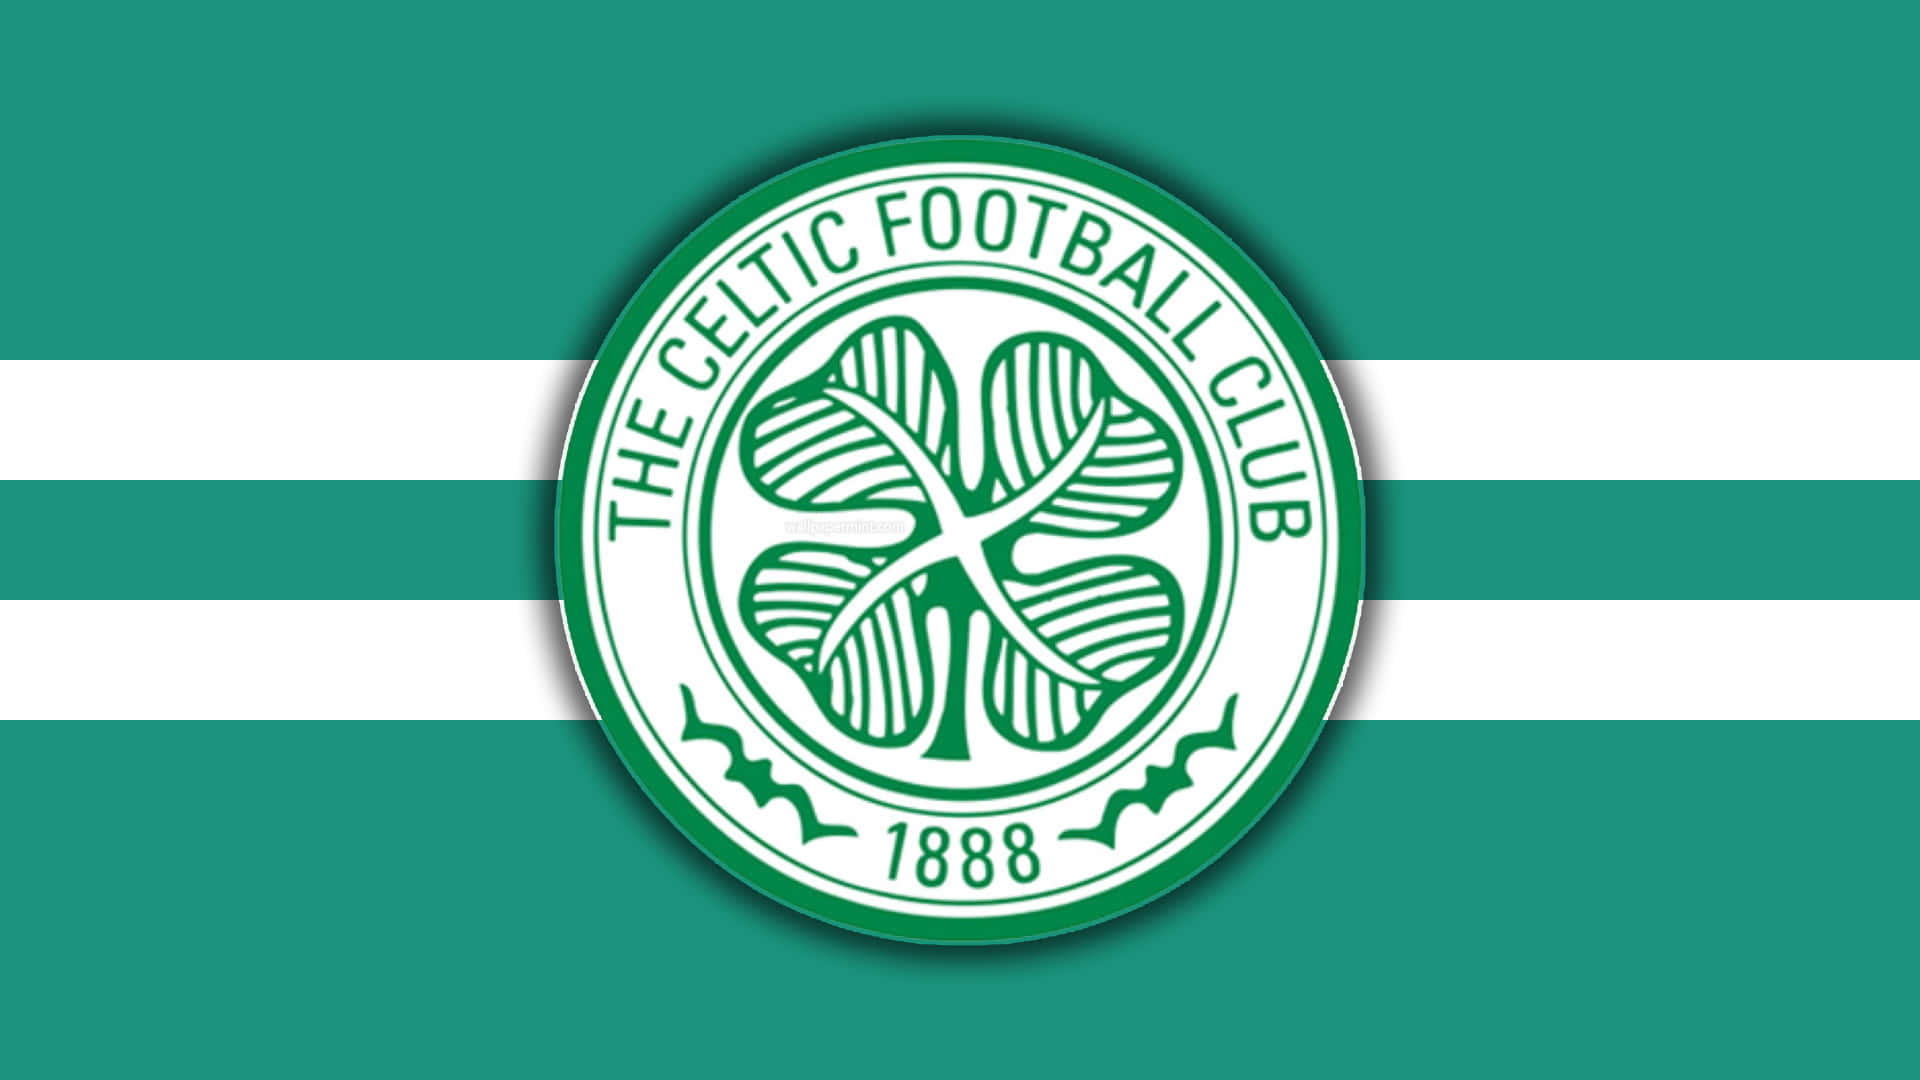 Celtic Fc Logo On A Green And White Background Wallpaper